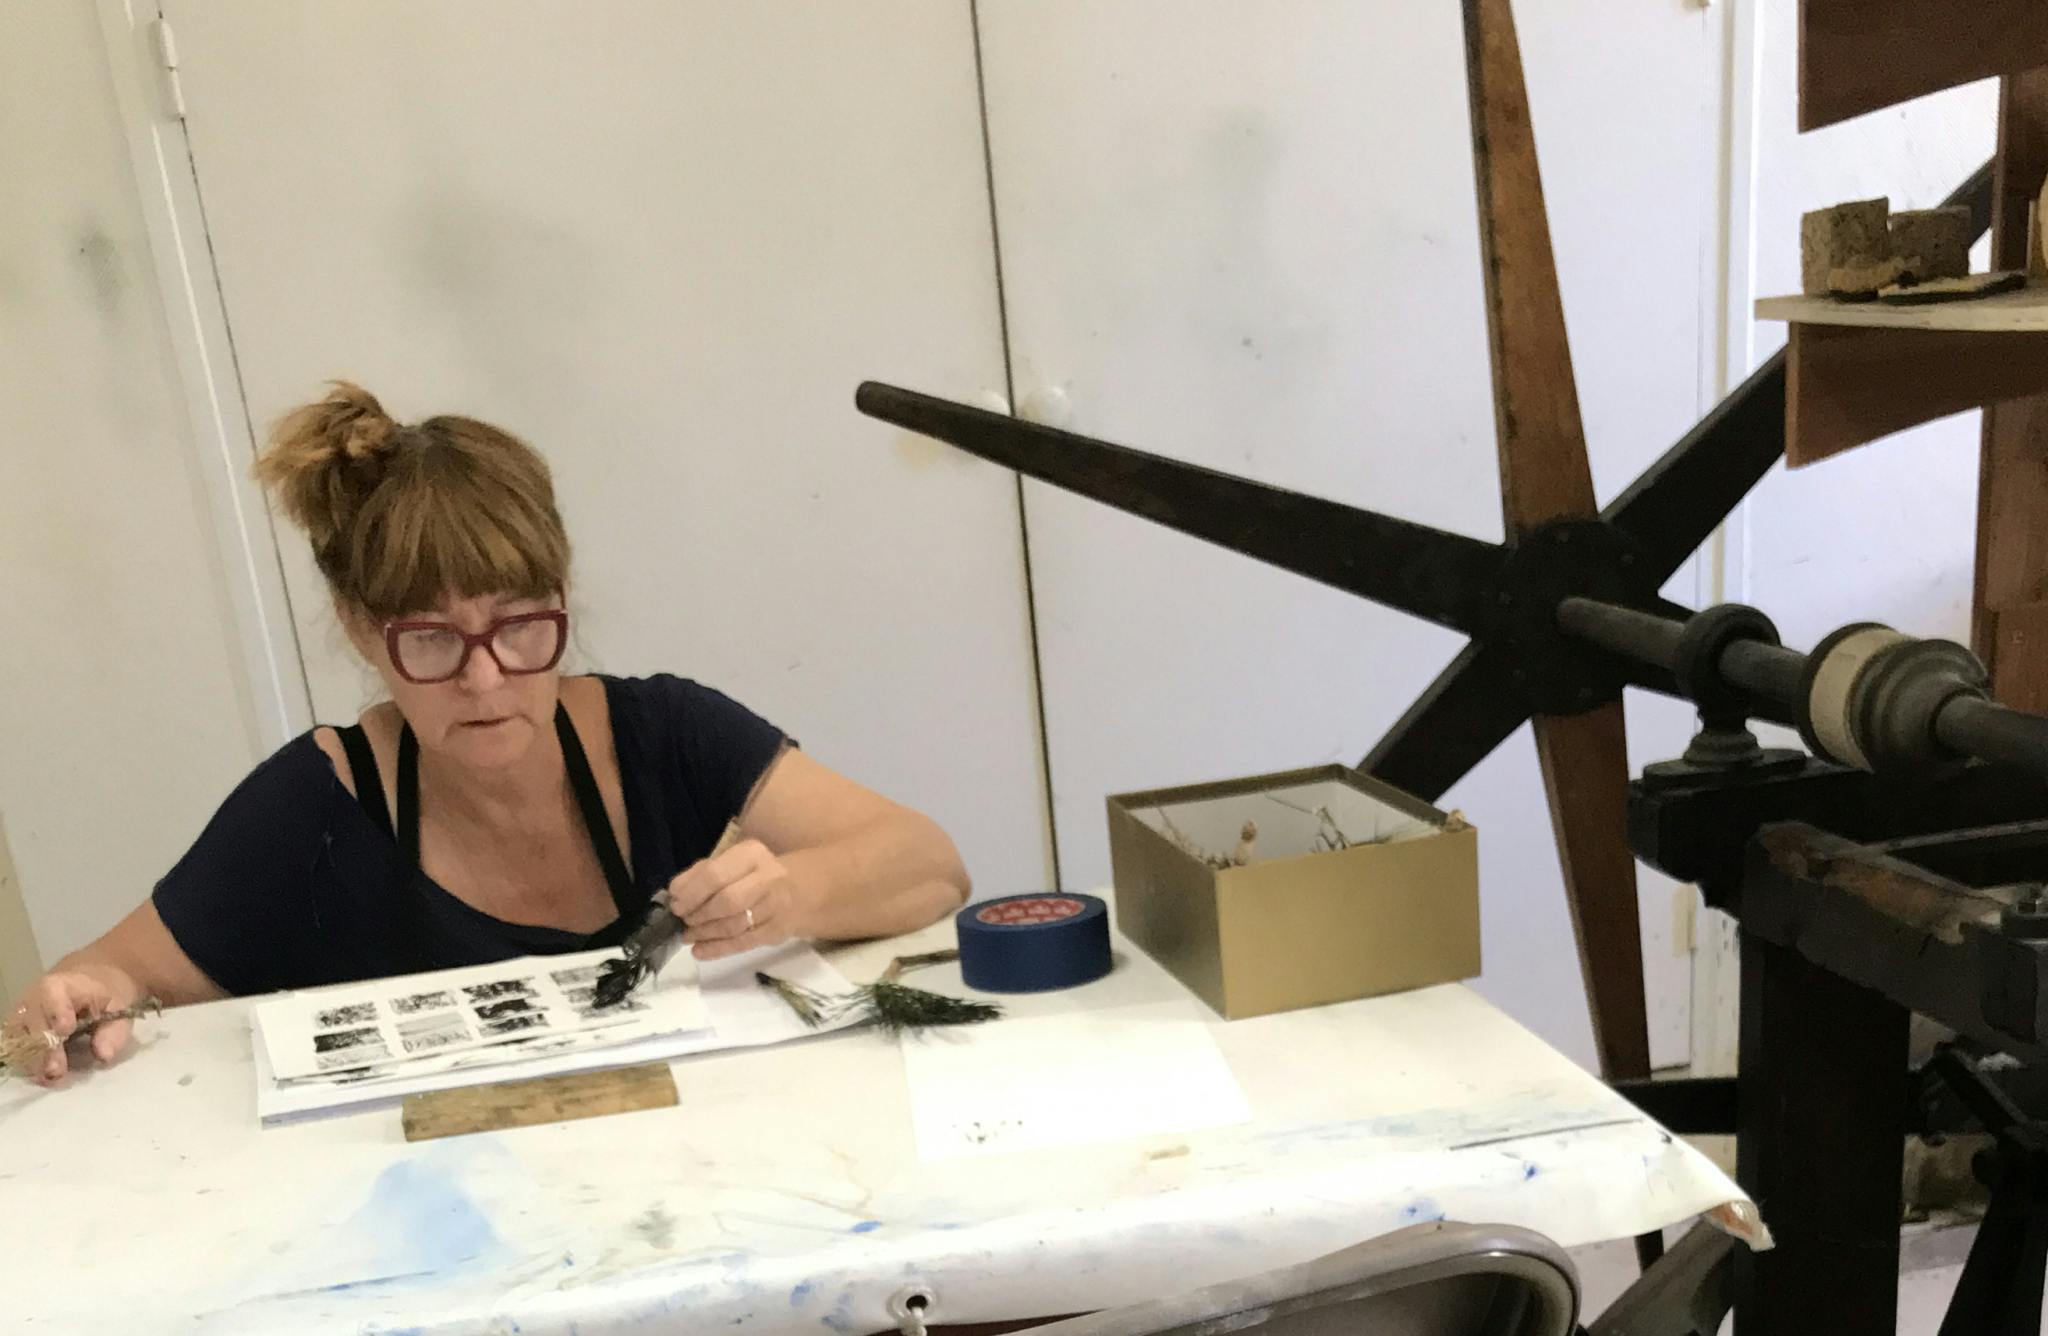 Jo Tyler brushes black ink on paper on a table next to a large printing press